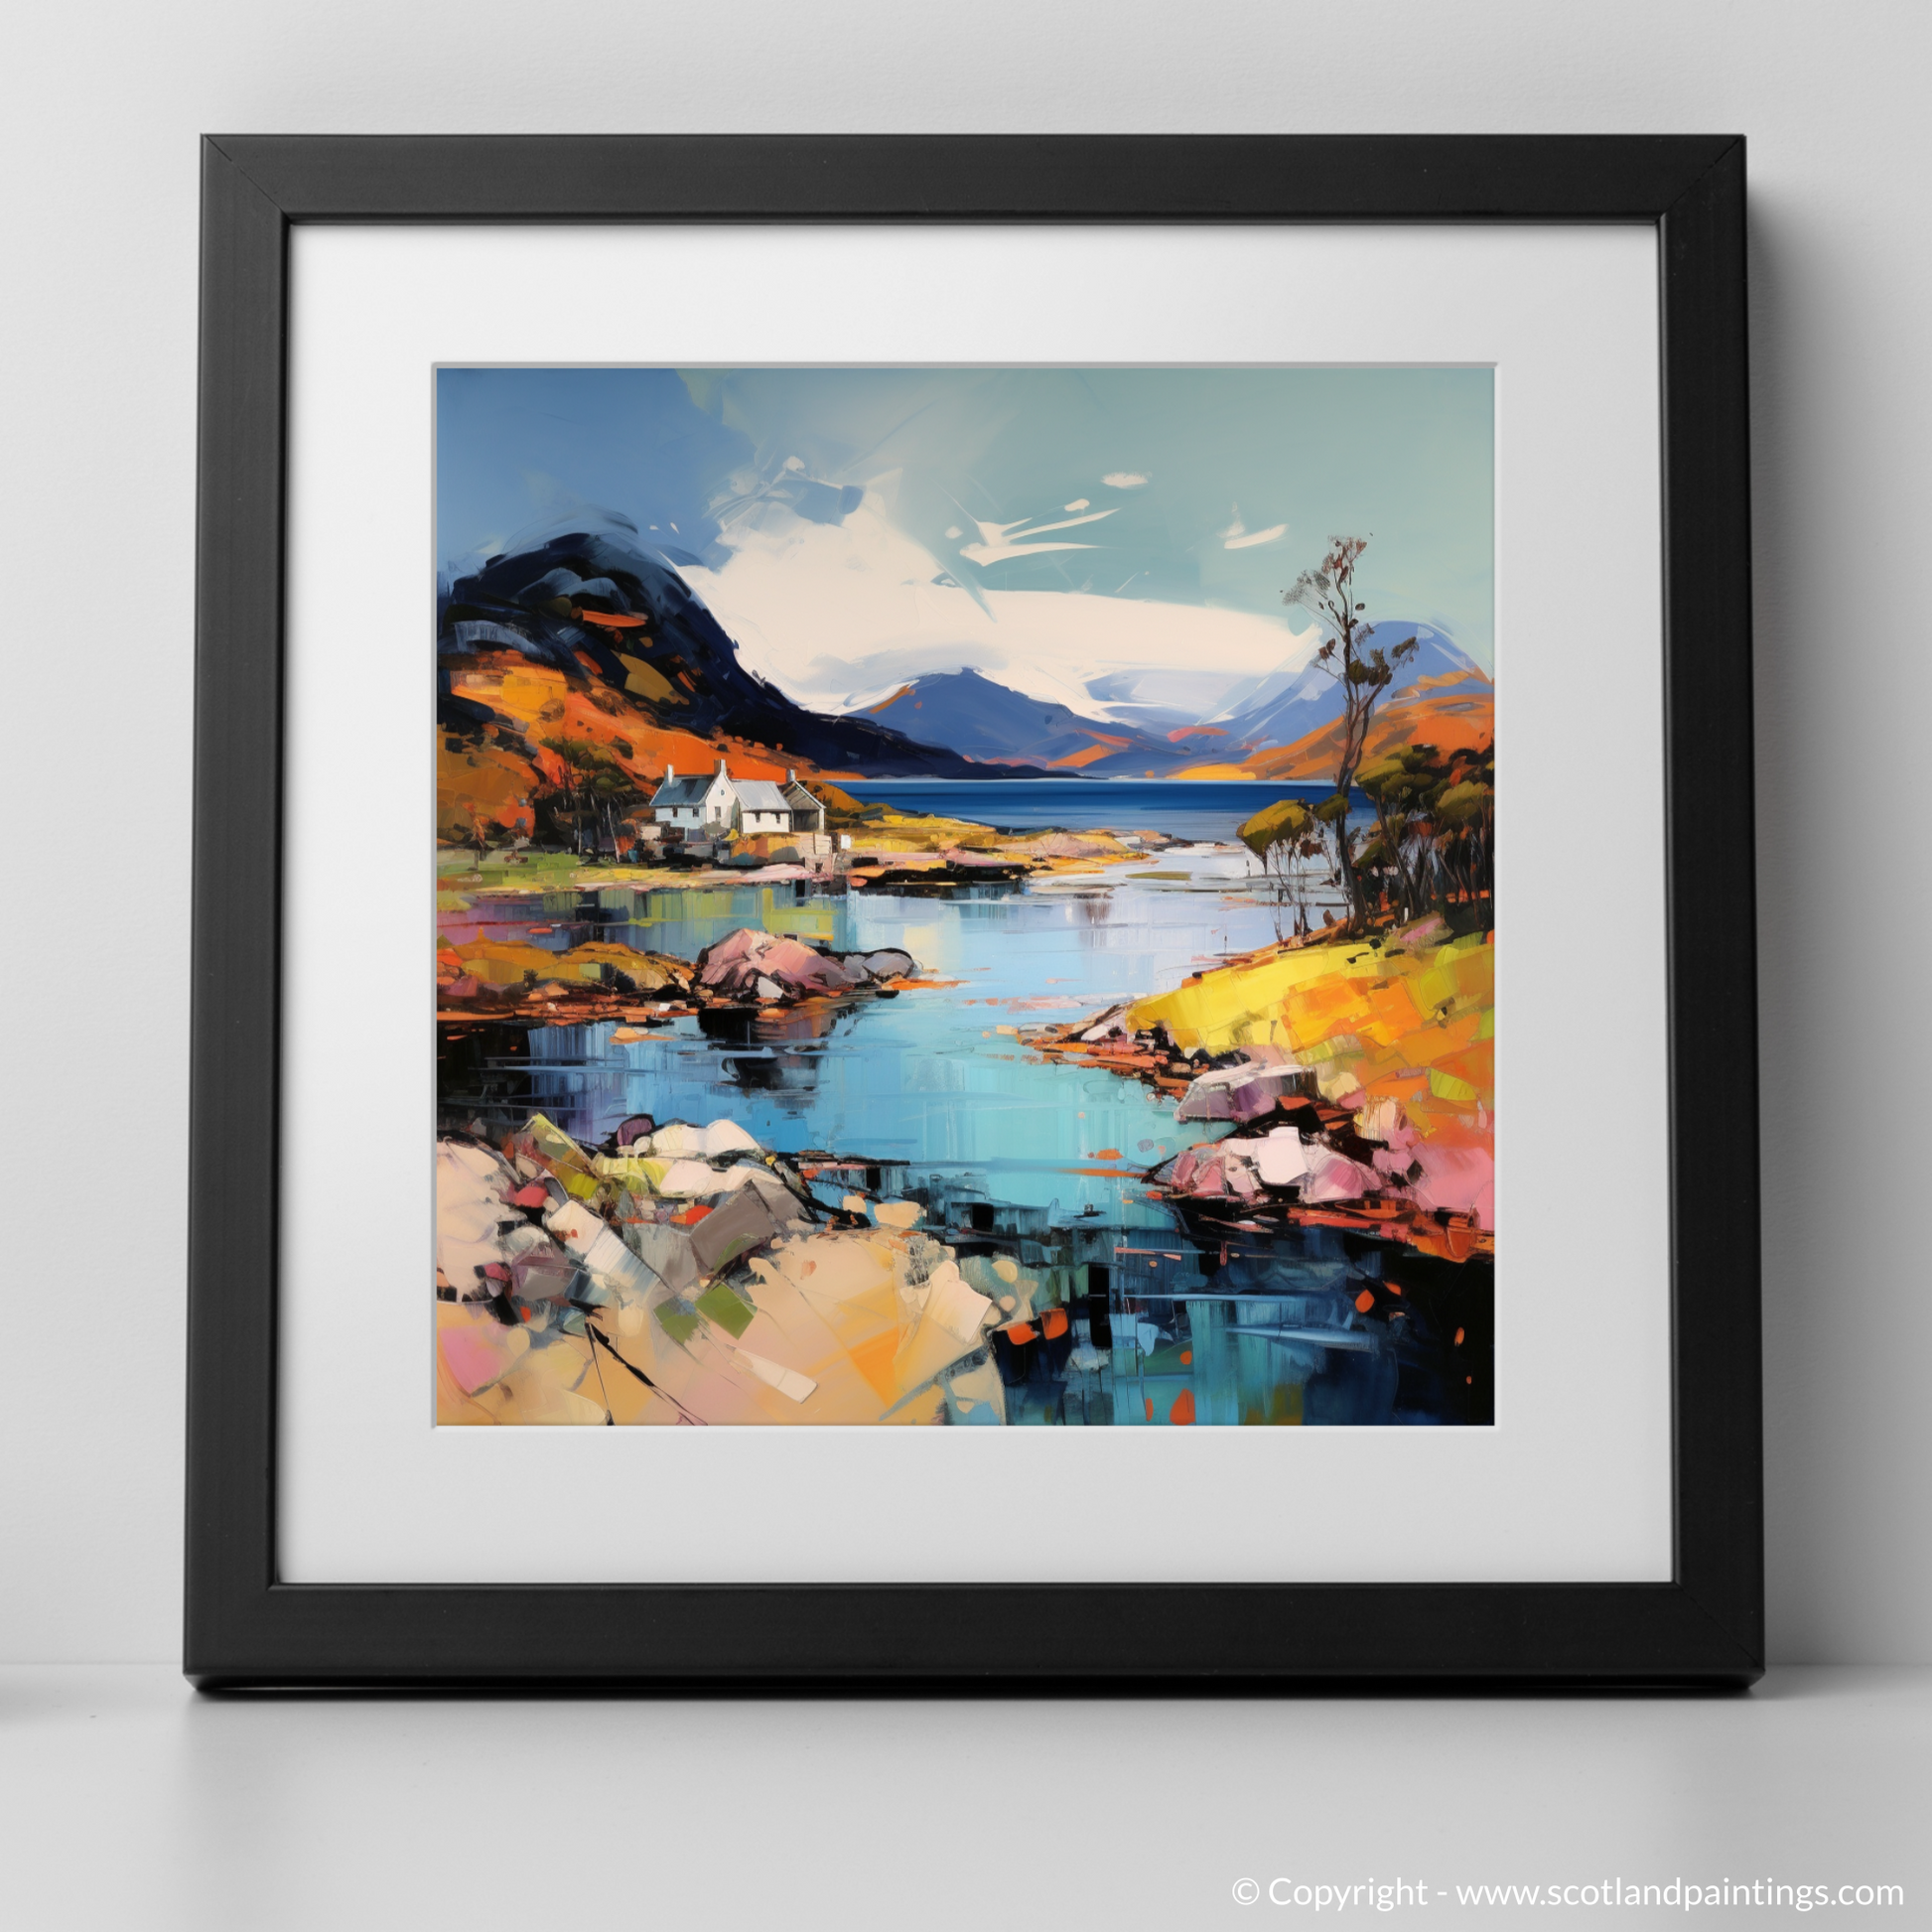 Art Print of Shieldaig Bay, Wester Ross with a black frame